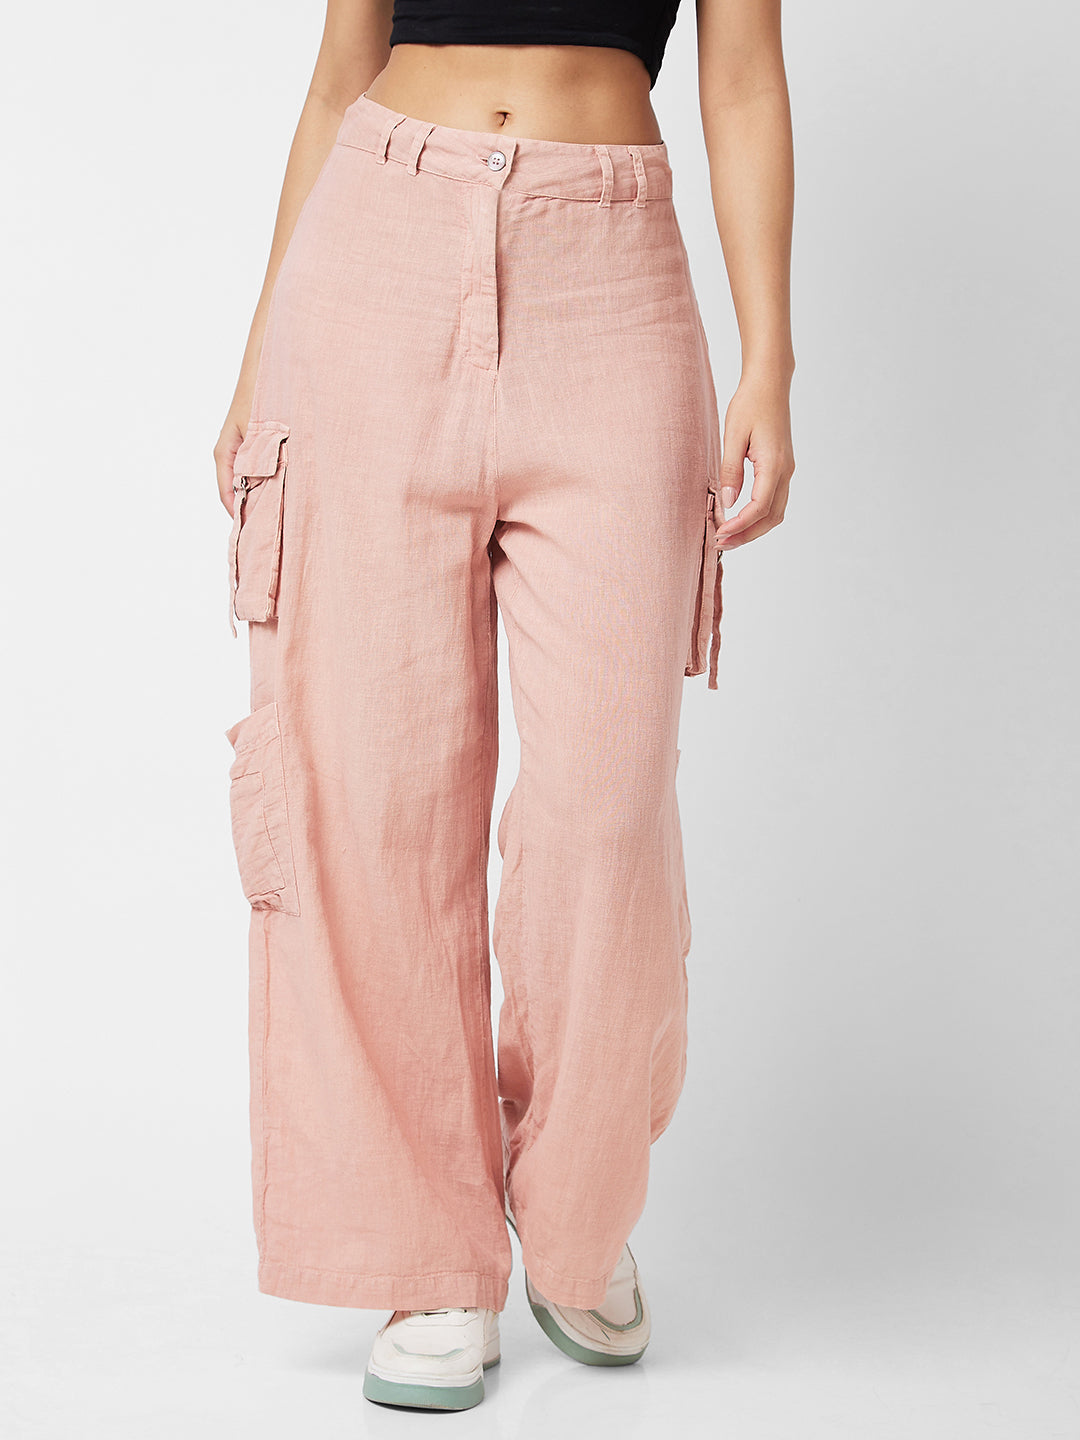 Spykar High Rise Pink Trousers For Women